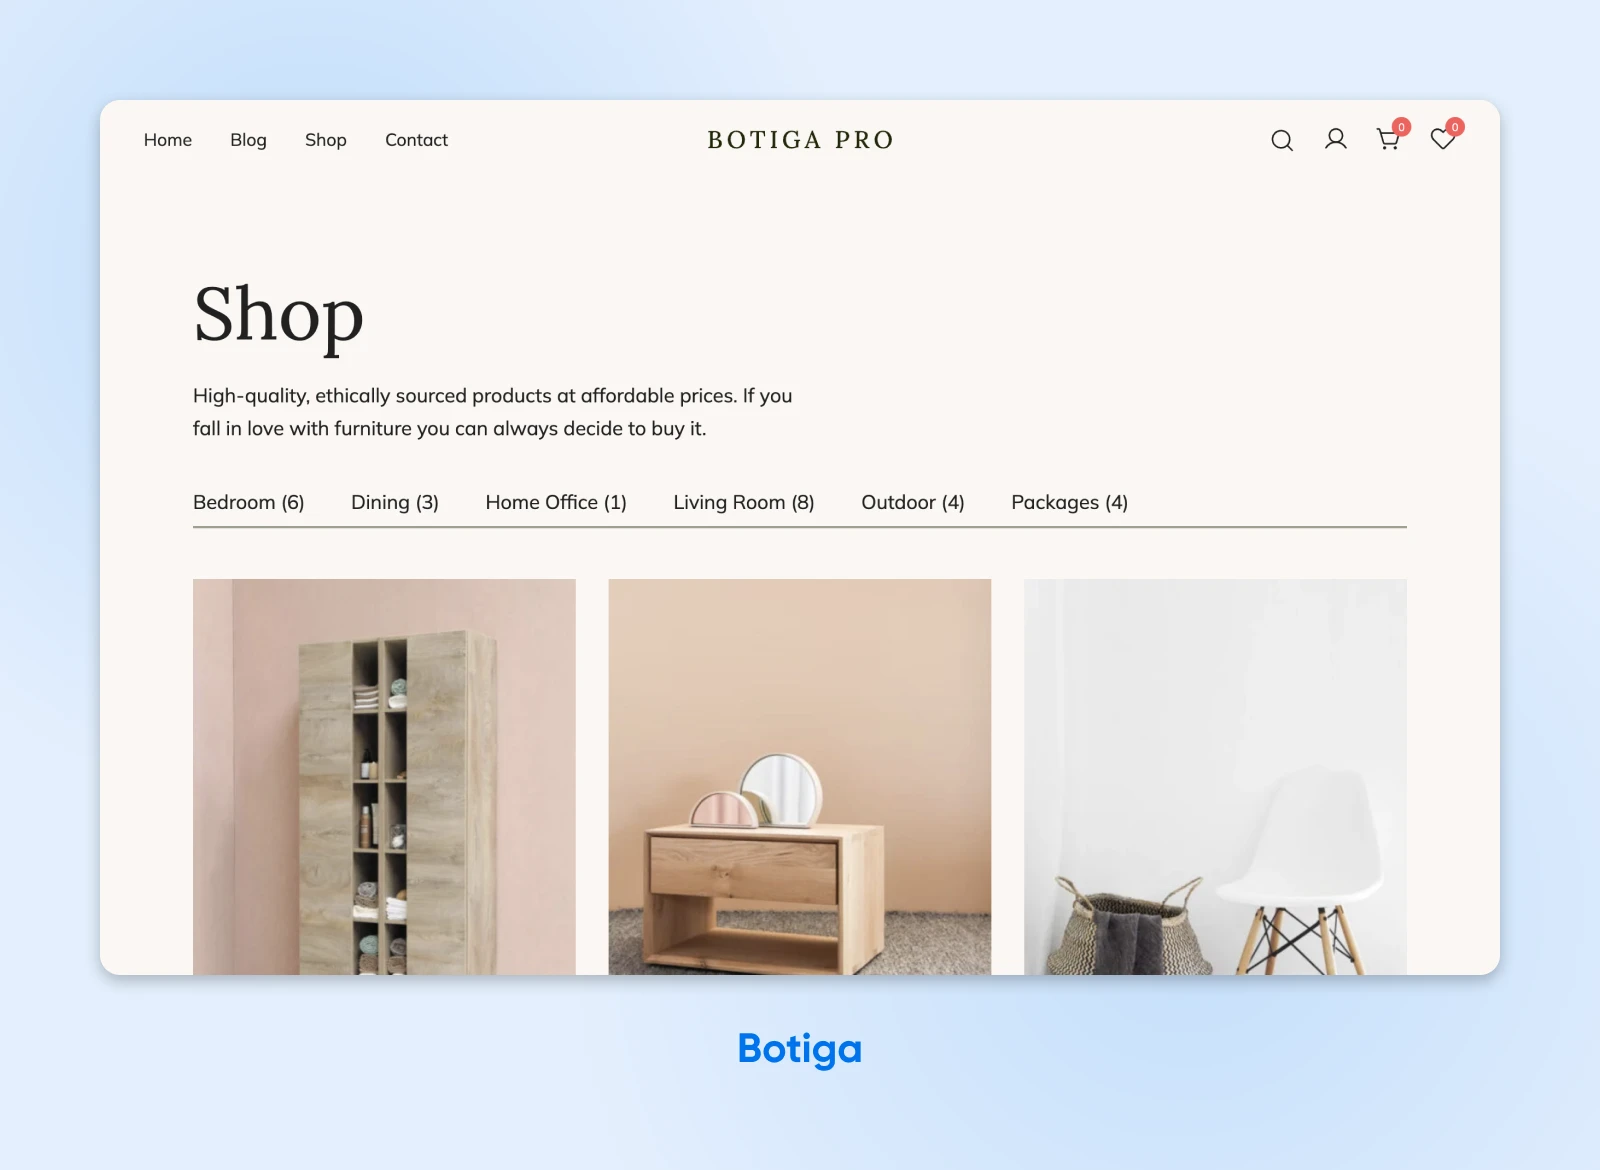 Botiga WooCommerce theme showcasing furniture products under "Shop" with different categories.